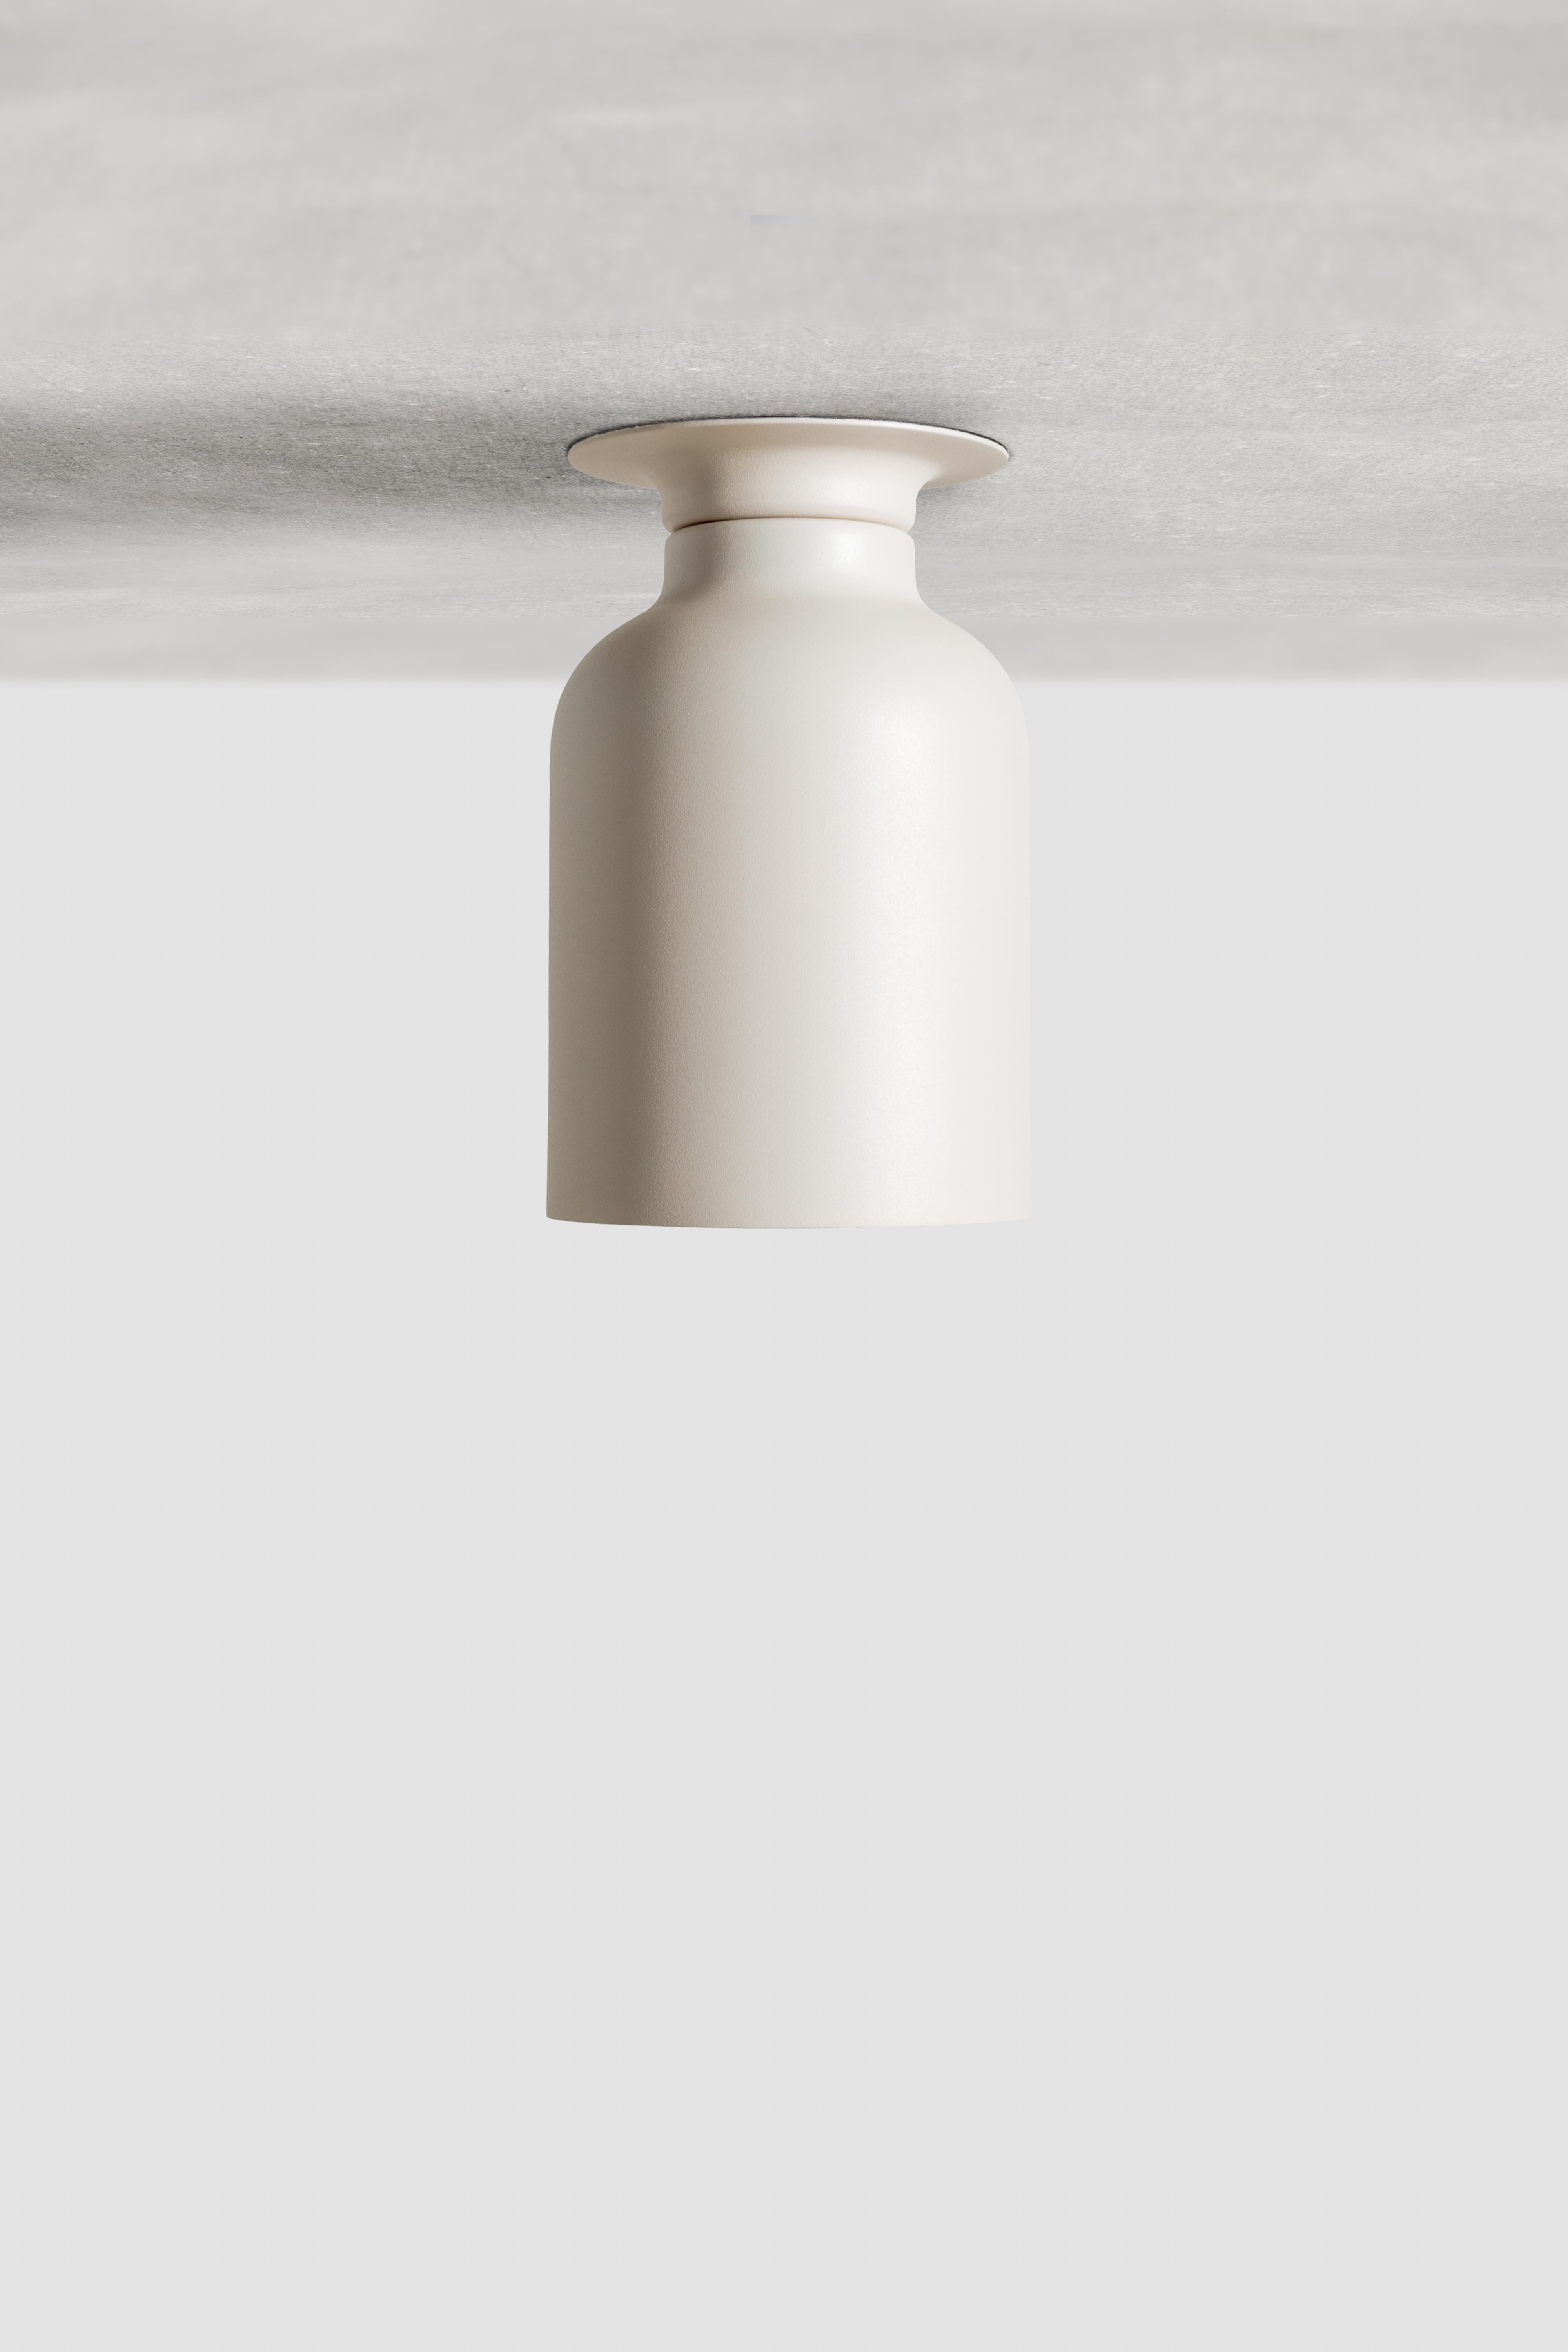 SPOTLIGHT VOLUMES, ceiling lamp / wall lamp
Design: Lukas Peet, Editor: ANDLight
UL Listed

Model shown: C

Inspired by spotlights, the Spotlight Volumes series is based on four unique shade profiles which combine in various ways. While designed